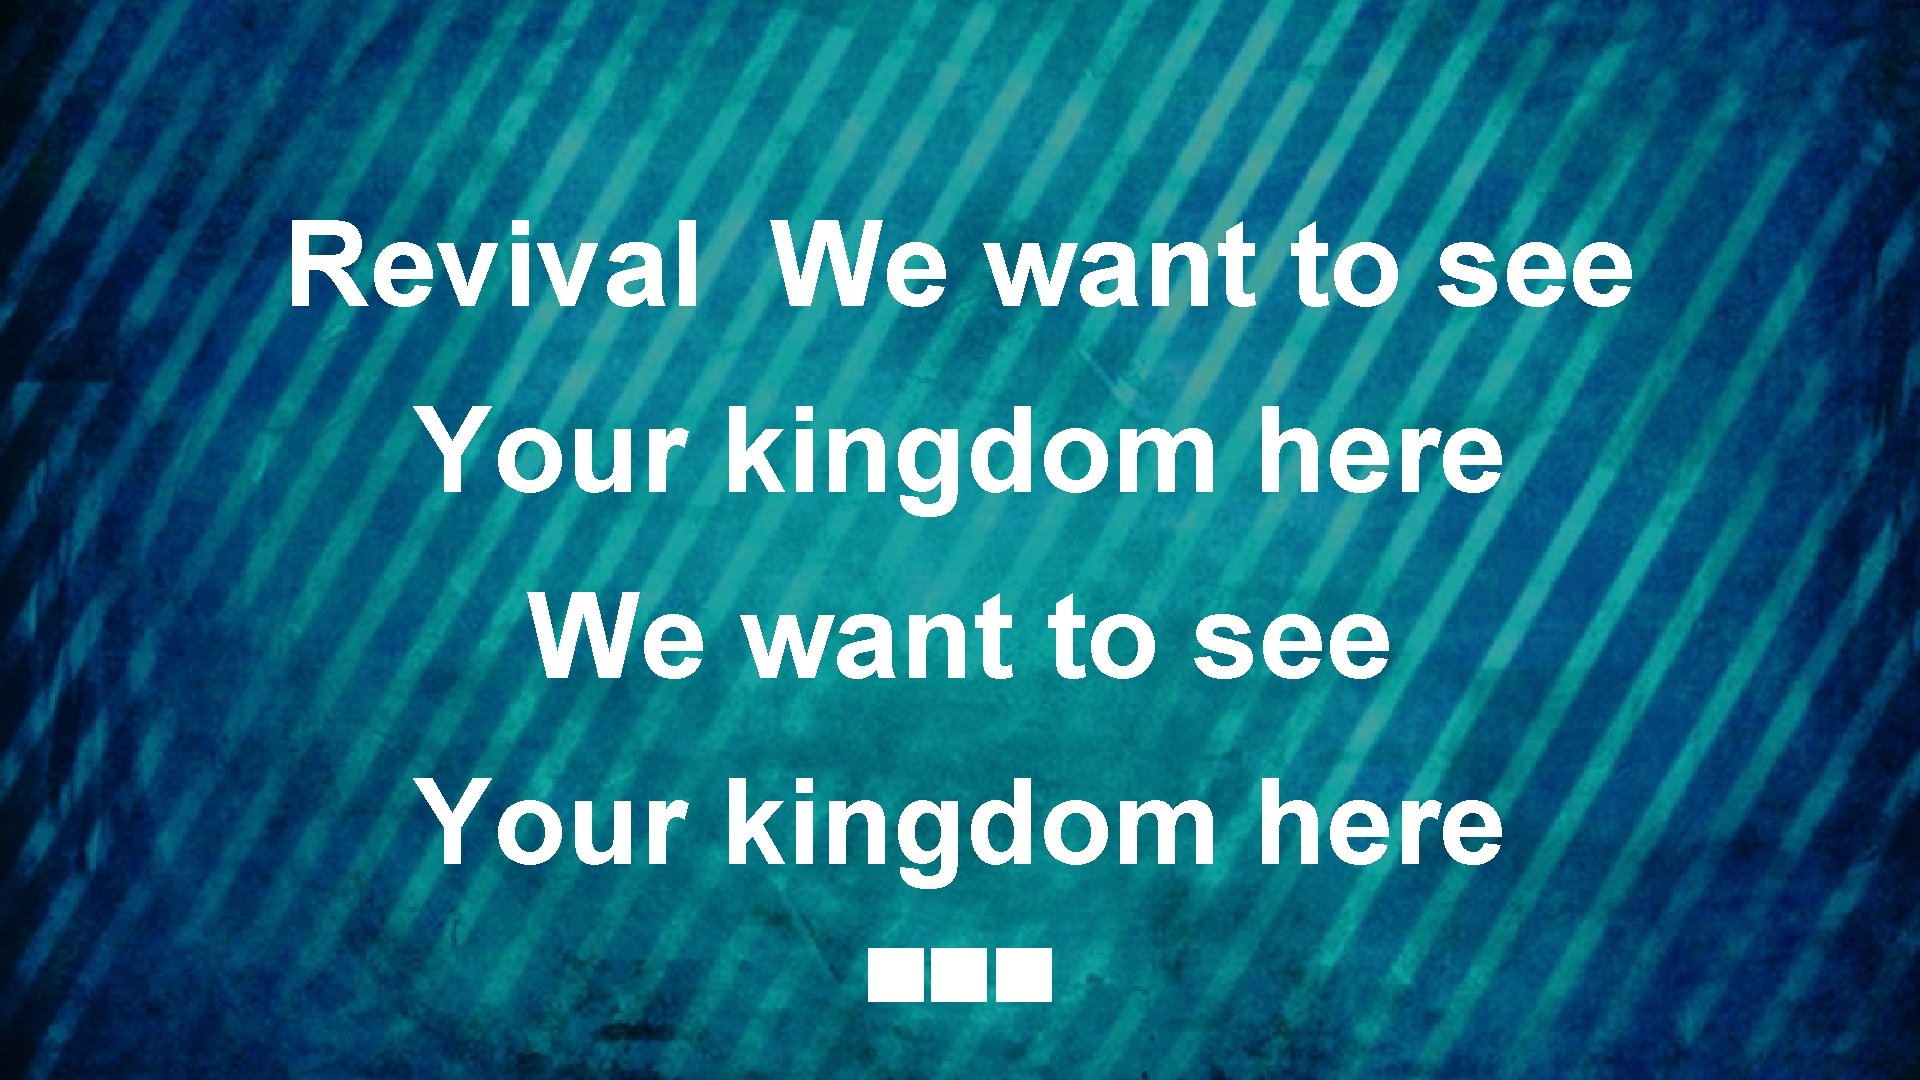 Revival We want to see Your kingdom here 